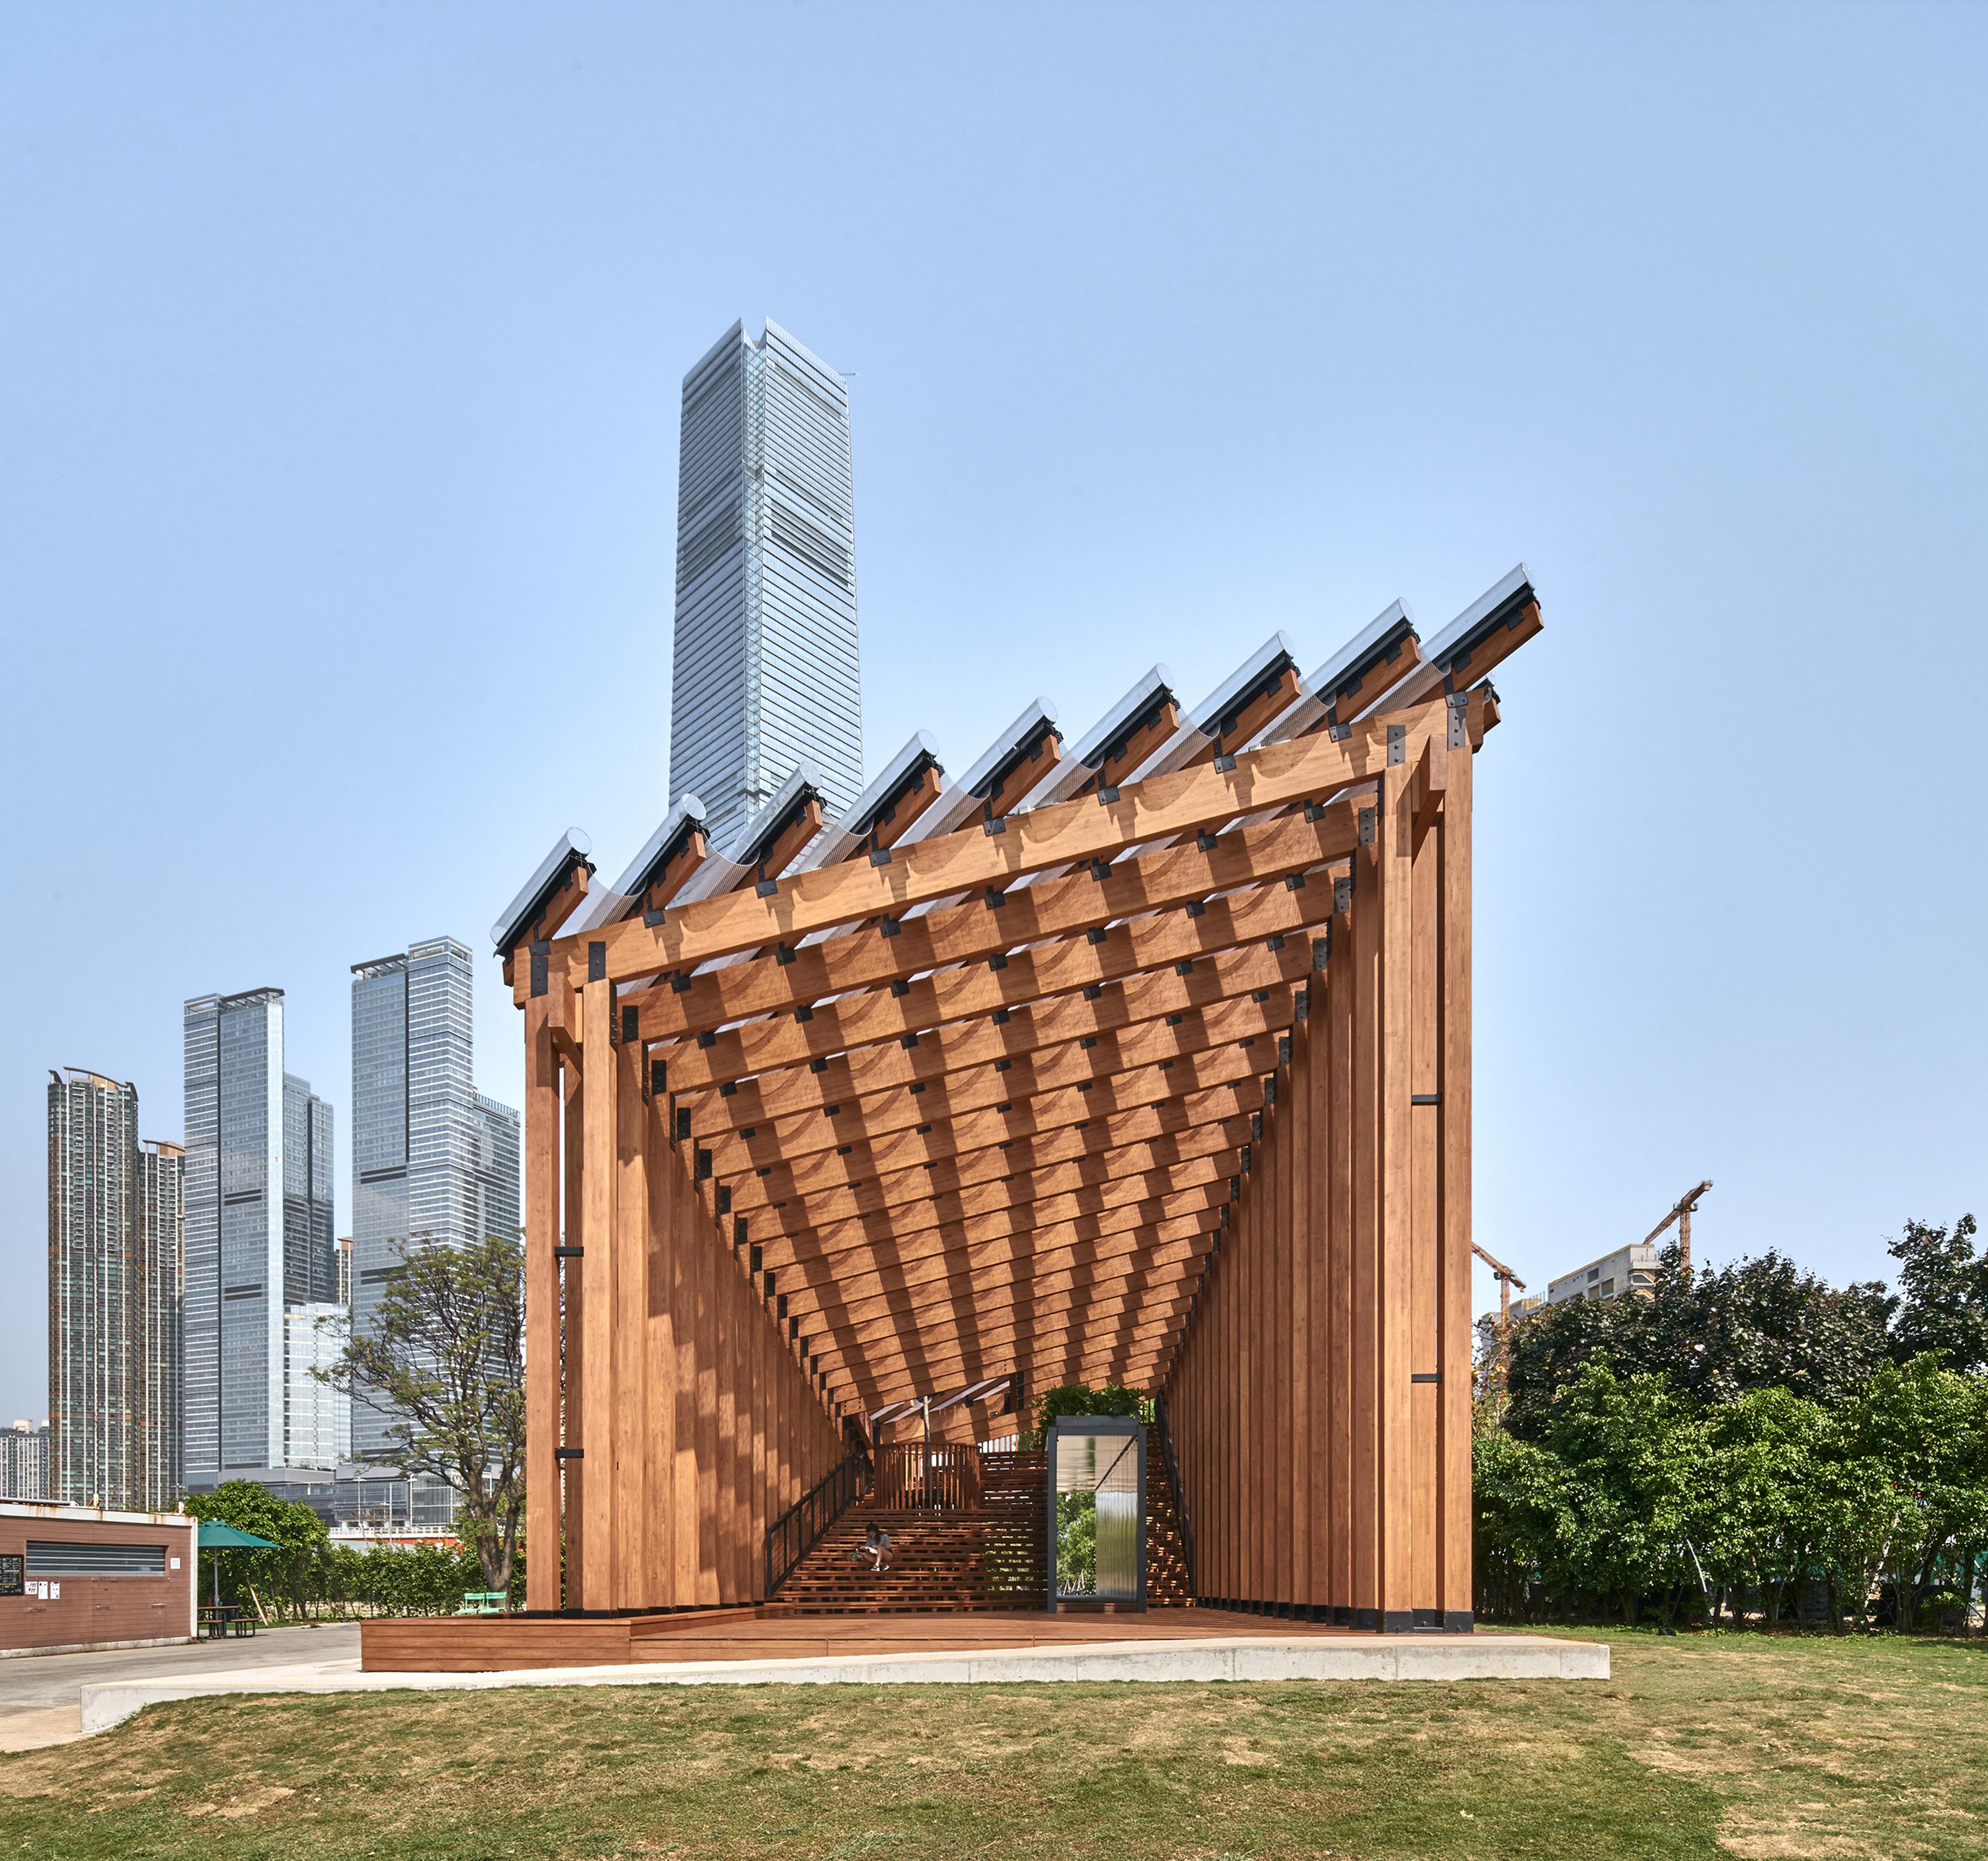 Pavilion structure in daylight with buildings in background